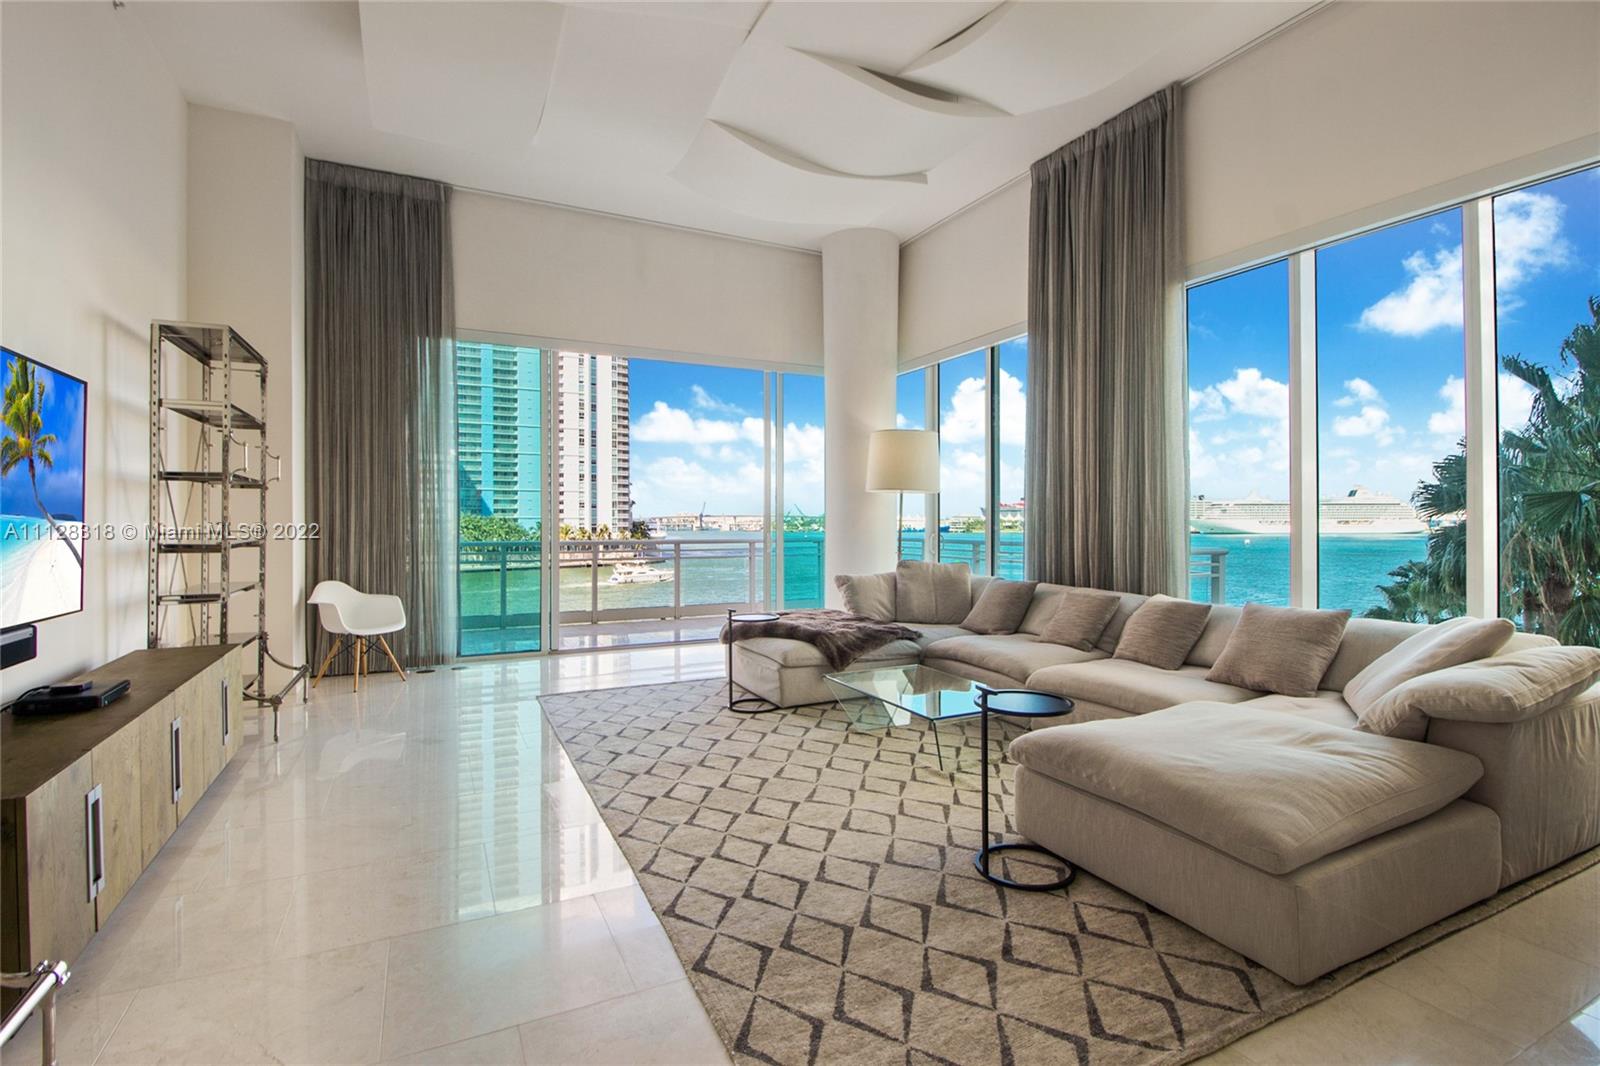 Rare opportunity to own this luxurious 2-story waterfront masterpiece which feels like a mansion floating on top of Biscayne Bay. Surrounded by turquoise water, this massive corner unit boasts over 14' ceilings, 4,631 SF of living space, 4-full/2-half bathrooms & 4-bedrooms (can convert to 5) w/ huge walk-in closets. Enjoy unobstructed views of Biscayne Bay and downtown skyline from 4 terraces w/ over 820+ SF of outdoor space. 6 parking spaces, 2 large storage units. Live the Island Life on gated Brickell Key Island & walk to everything that booming Brickell has to offer: shopping, restaurants, Brickell City Centre & more! Asia is Brickell Key's most premier building w/ 5-star amenities: 24hr gate guard & security, fitness center, pool, private tennis court, racquetball, basketball & more!